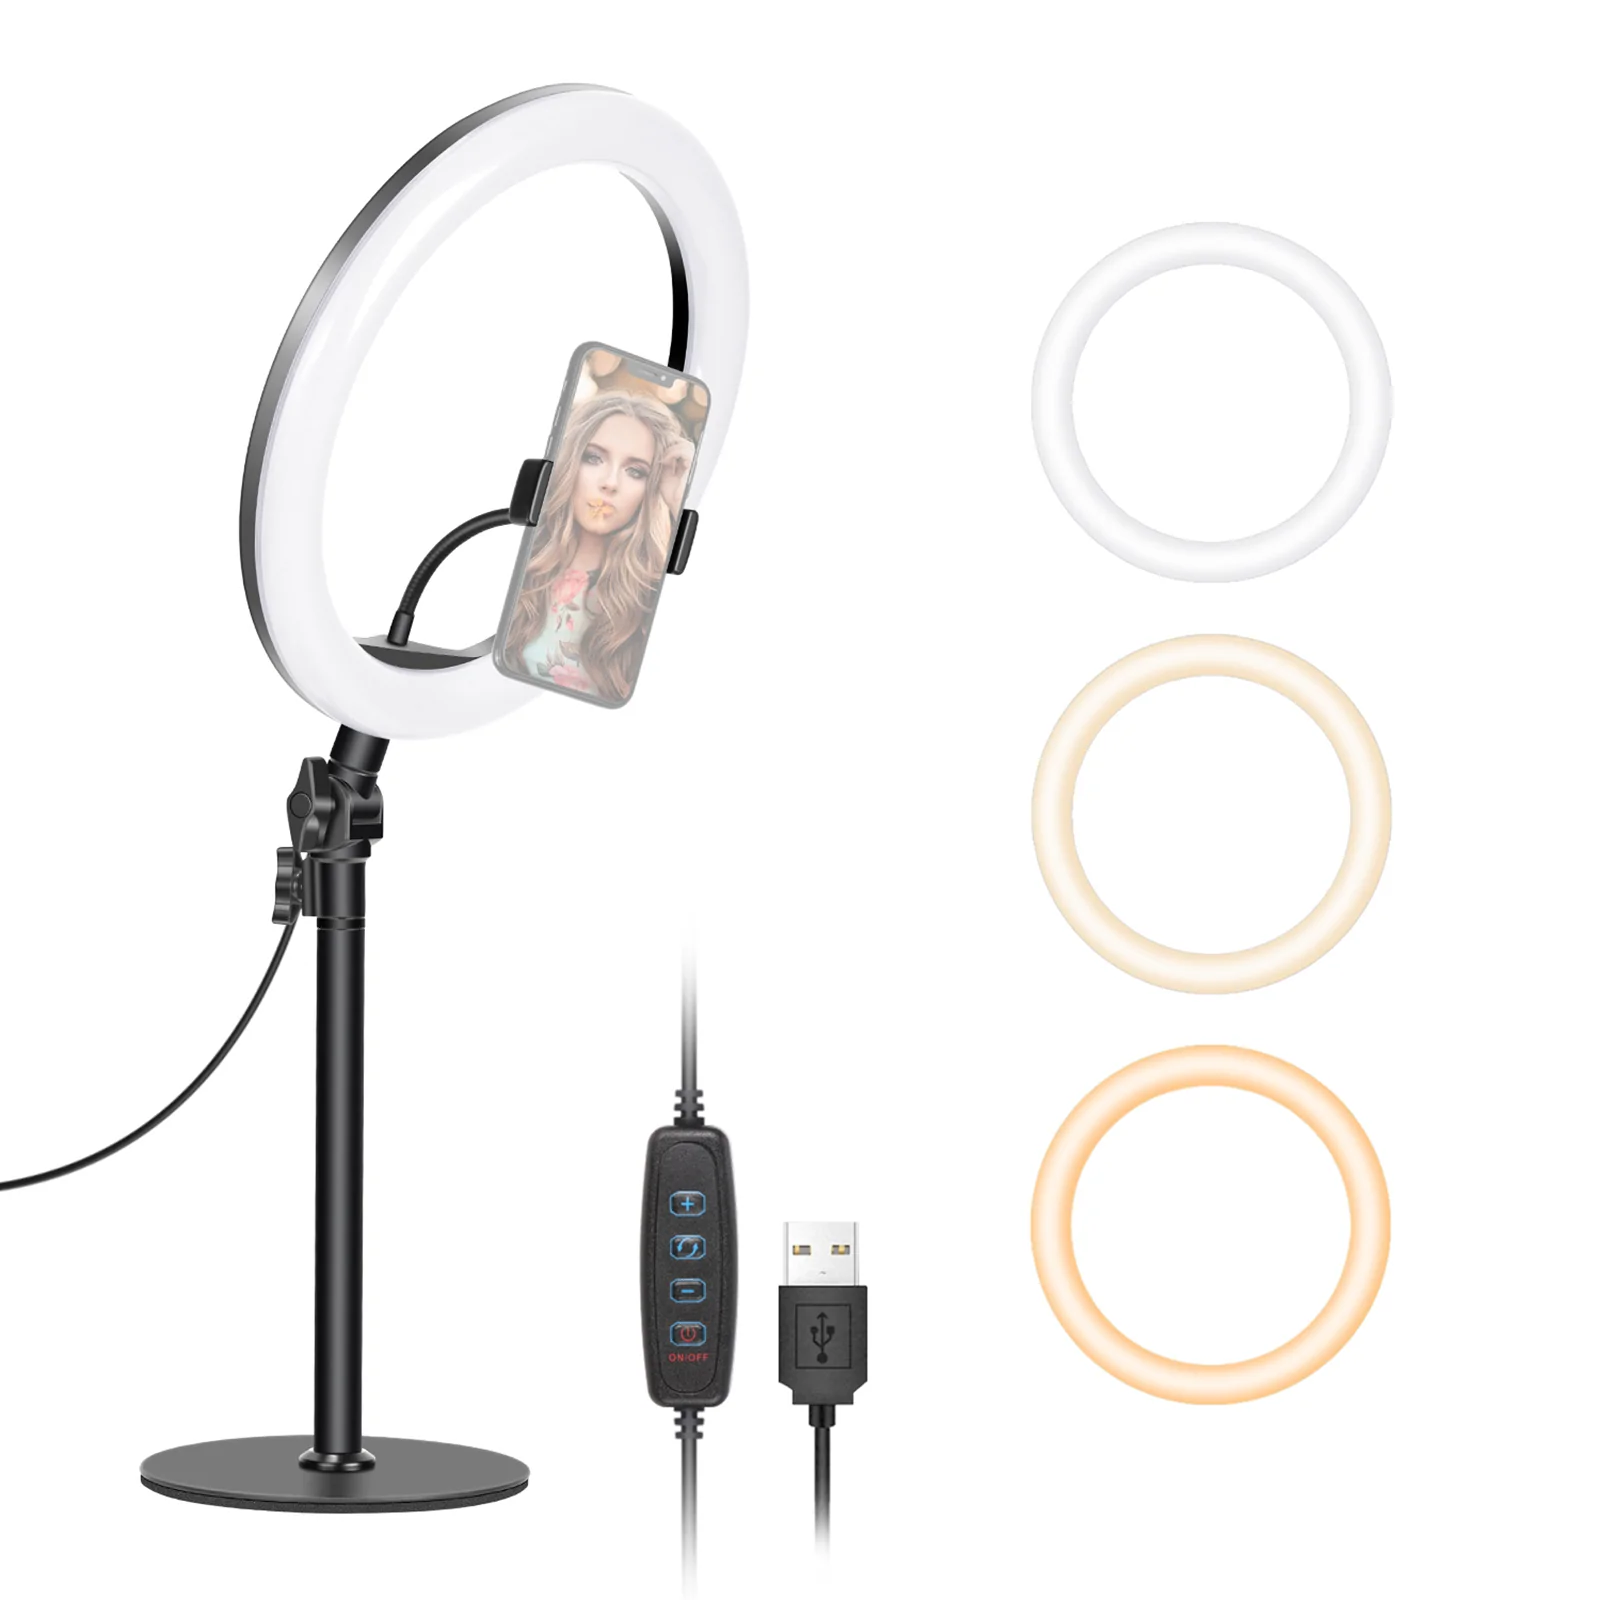 Neewer Table Top 10-inch USB LED Ring Light